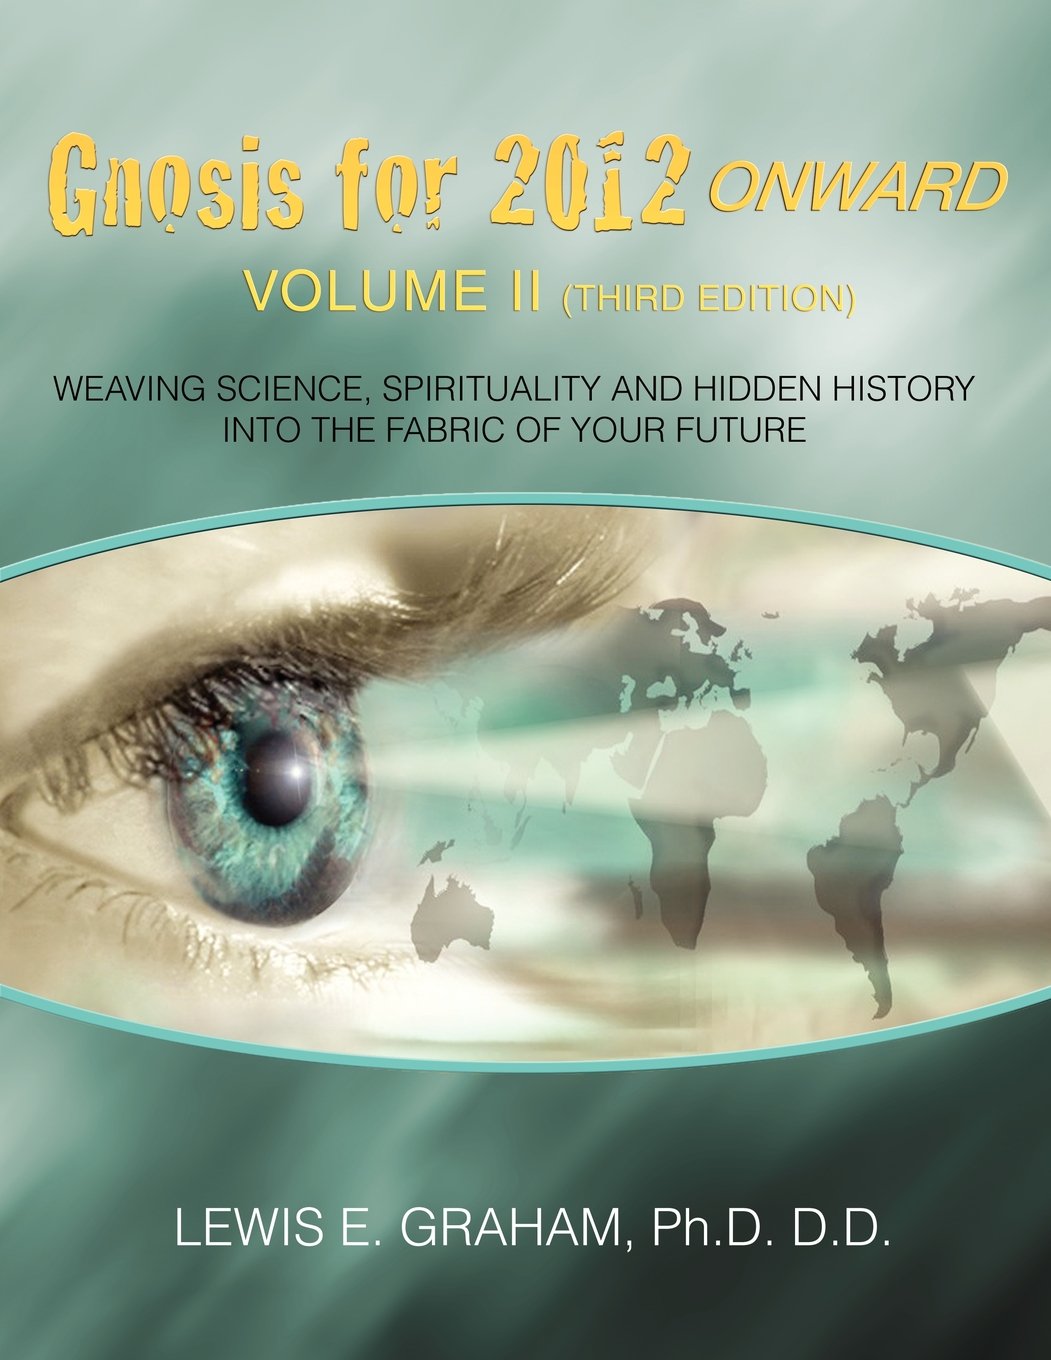 Gnosis For 2012 Onward: Weaving Science, Spirituality and Hidden History into the Fabric of Your Future (Volume II)